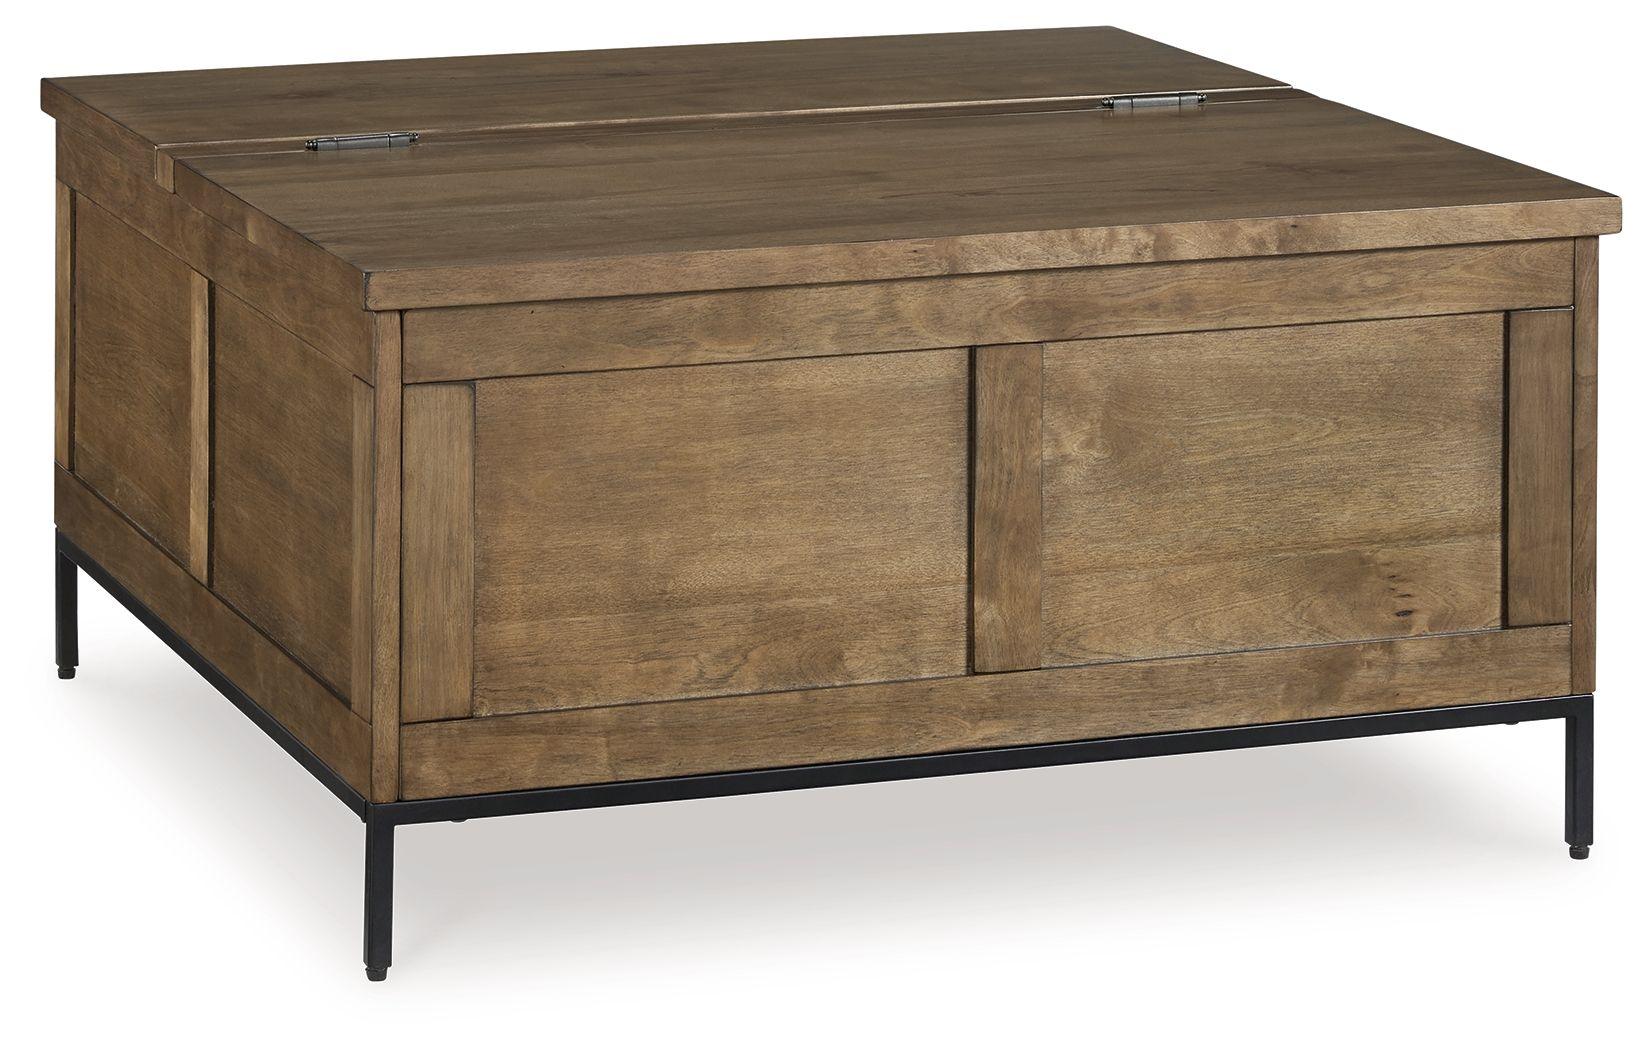 Signature Design by Ashley® - Torlanta - Brown - Lift Top Cocktail Table - 5th Avenue Furniture